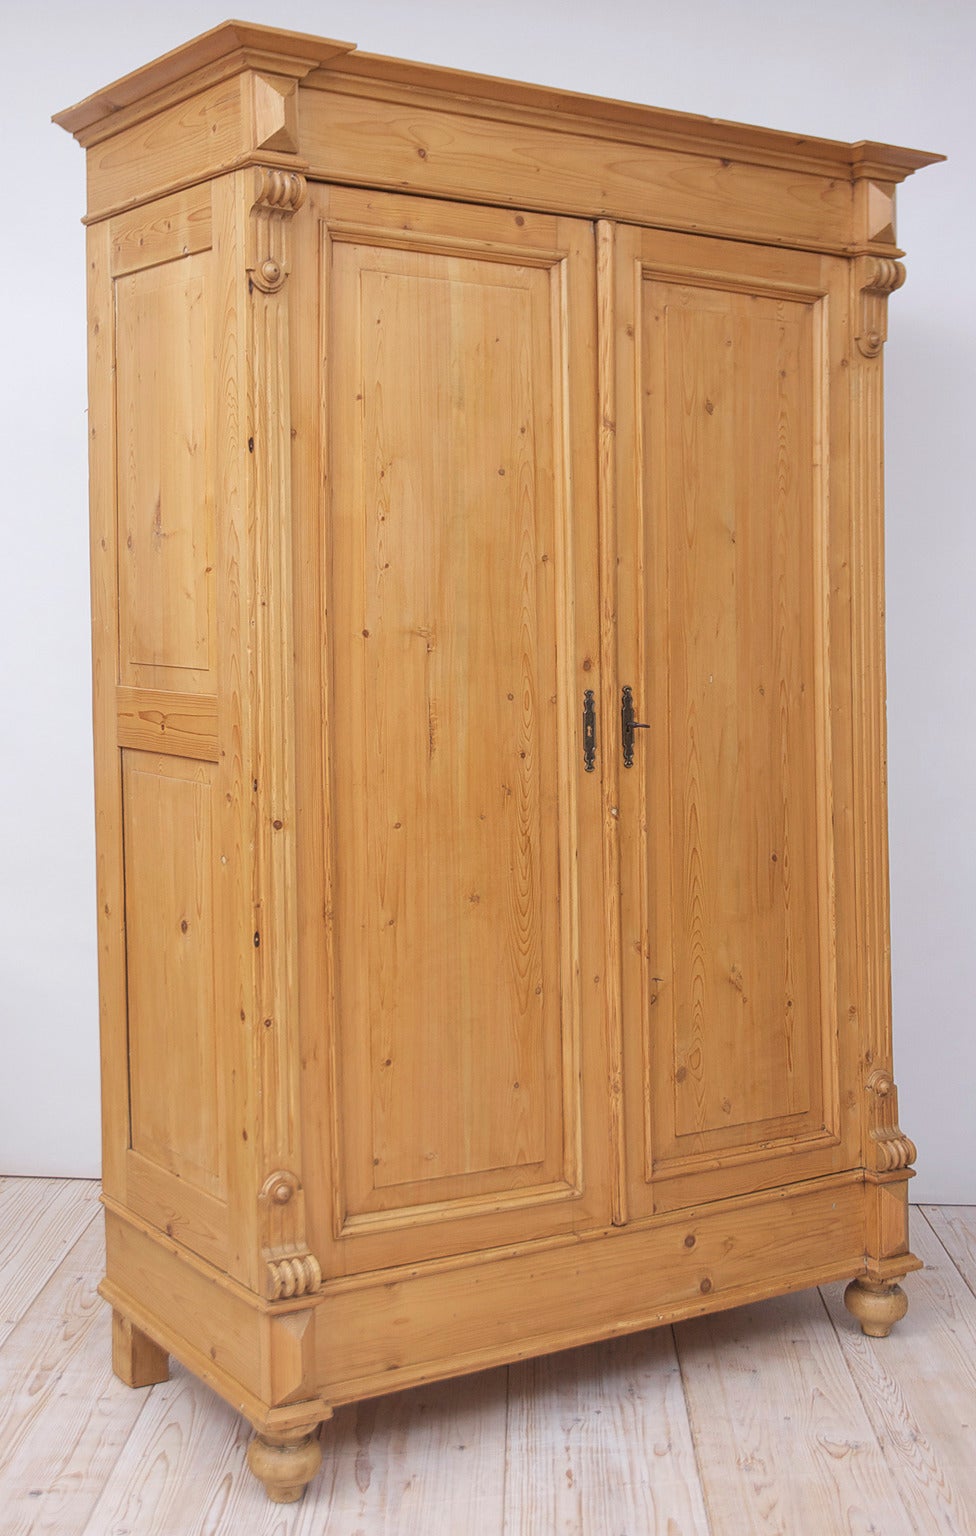 A pine armoire with two raised-paneled doors, carved escutcheons defining the corners, side panels and resting on turned bun feet. Offers interior shelving. Dating from the rise of the German Republic (Gründerzeit period). Germany, circa